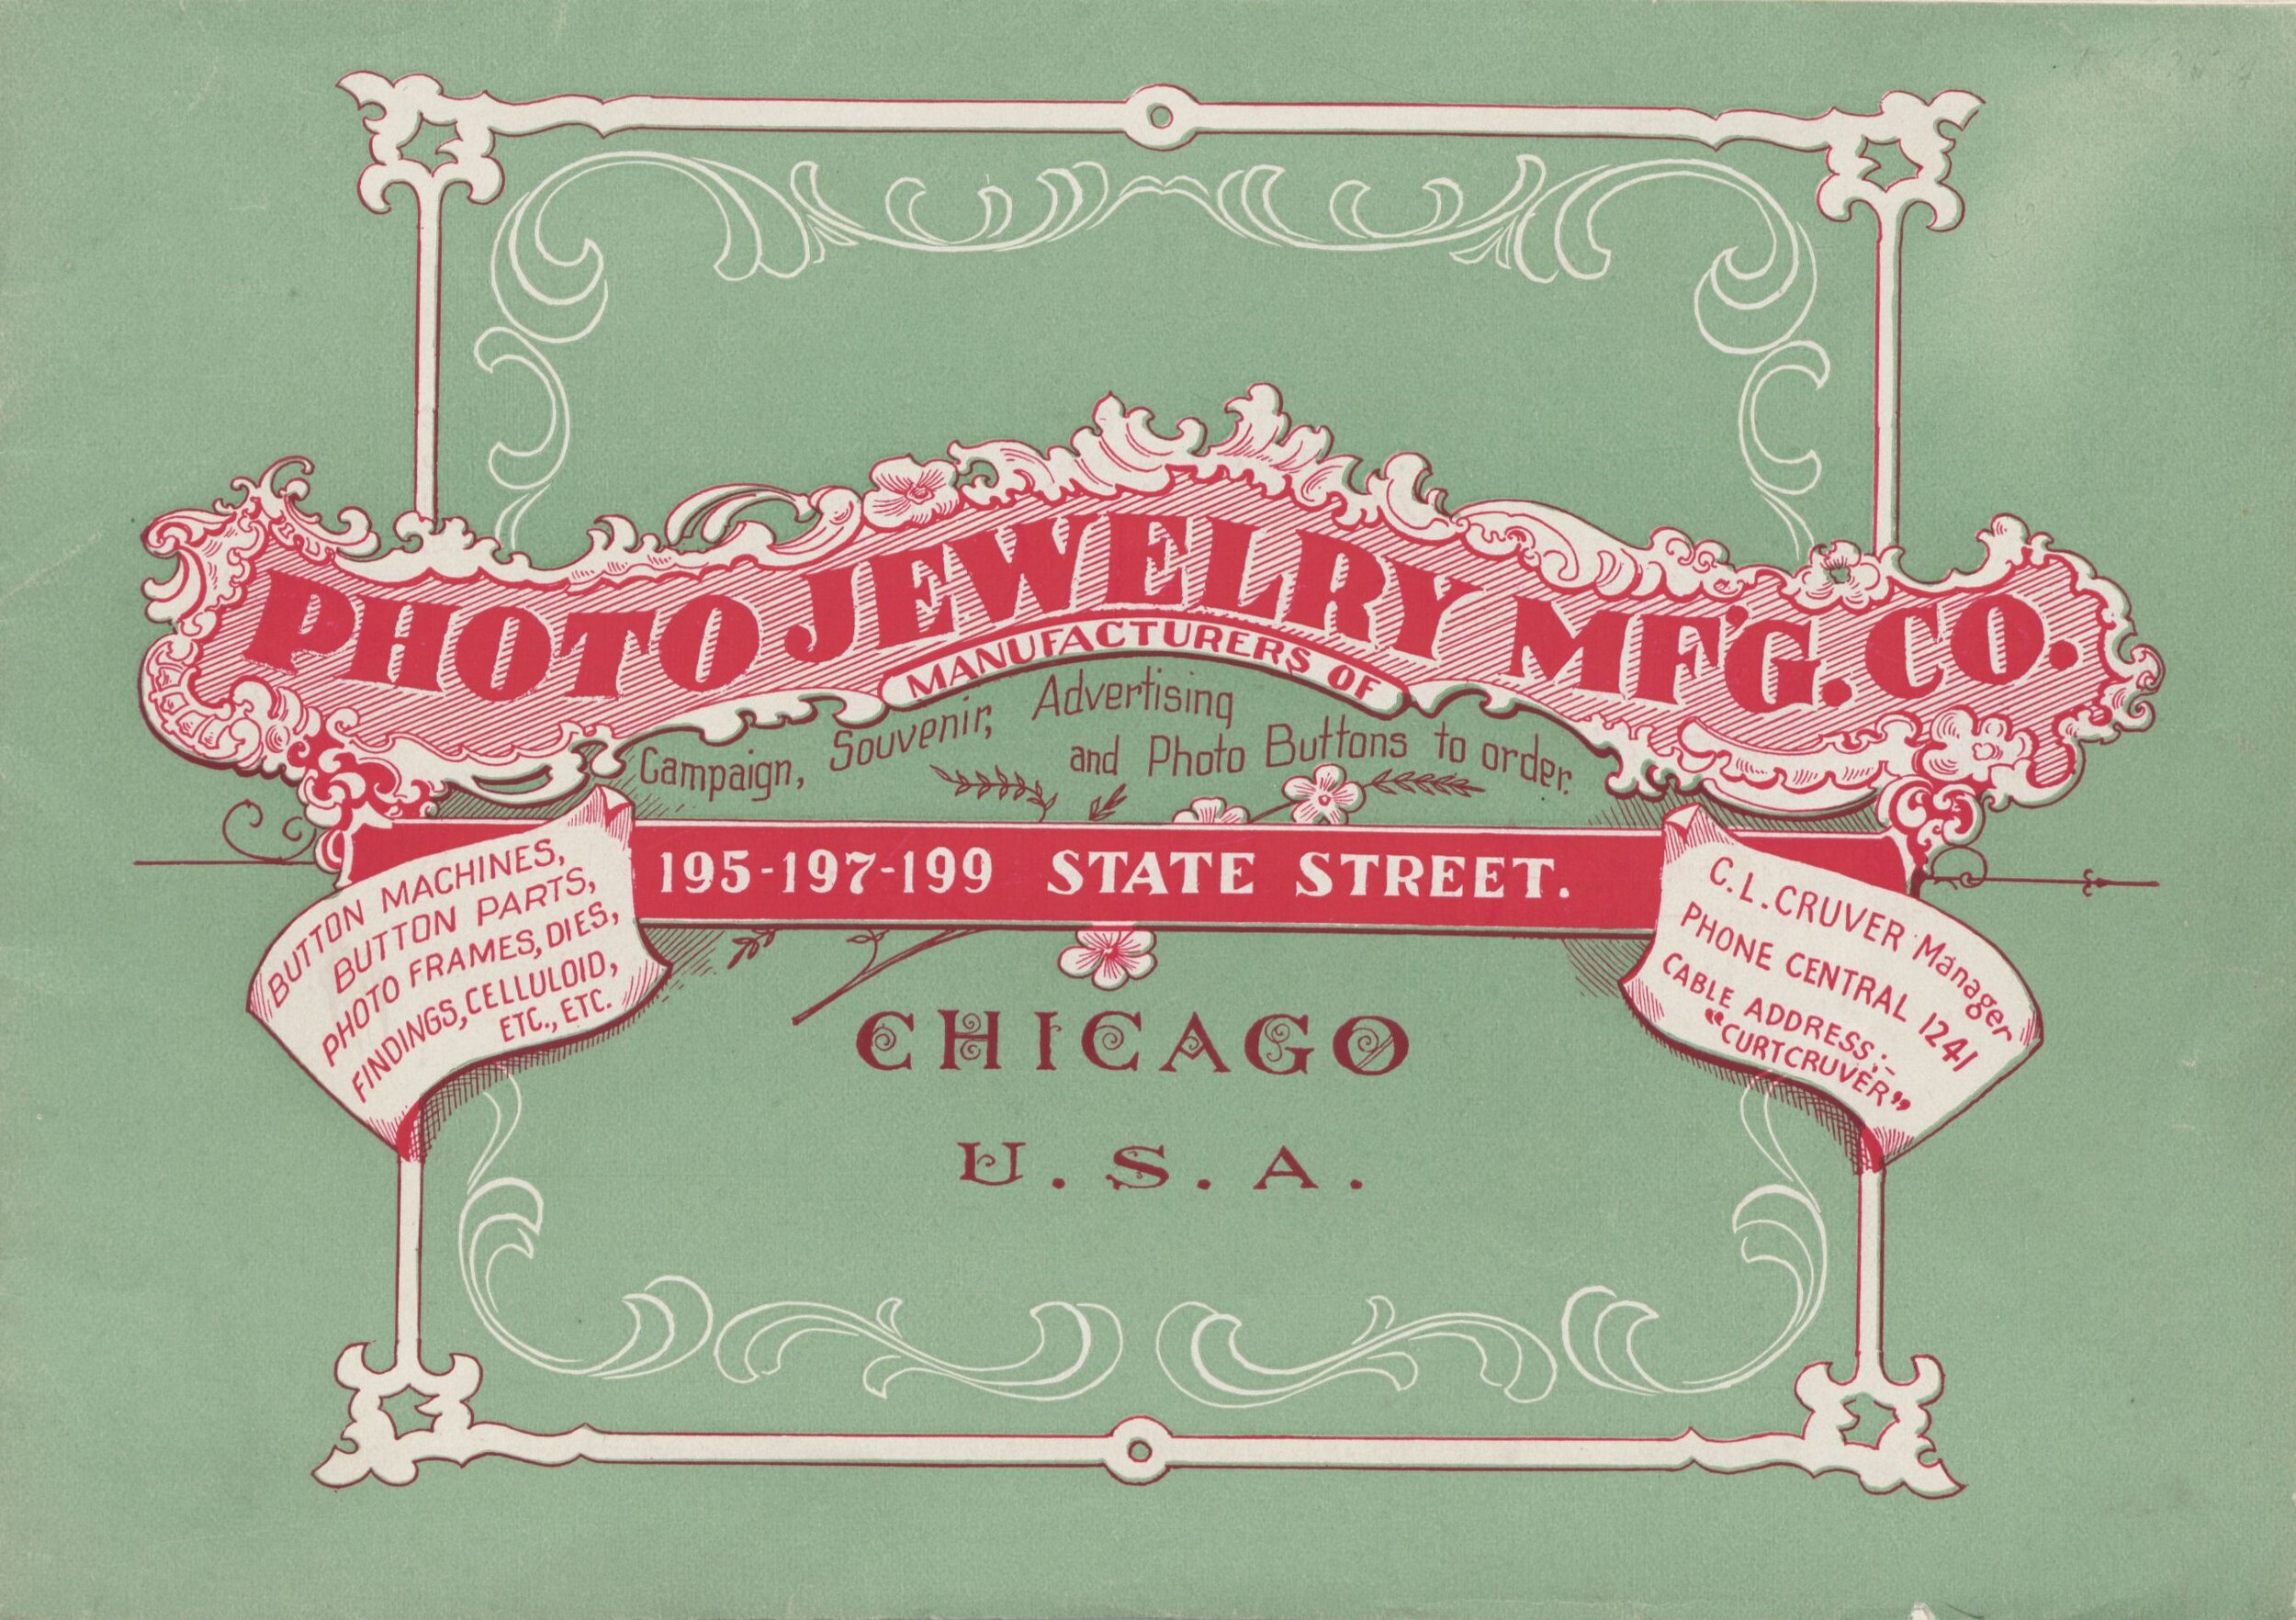     Photo Jewelry Mf'g. Co.: Campaign, Souvenir, Advertising and Photo Buttons To Order: Button Machines, Button Parts, Photo Frames, Dies, Findings, Celluloid, etc.    &nbsp;(Chicago: Photo Jewelry Mf'g, ca.1900).  